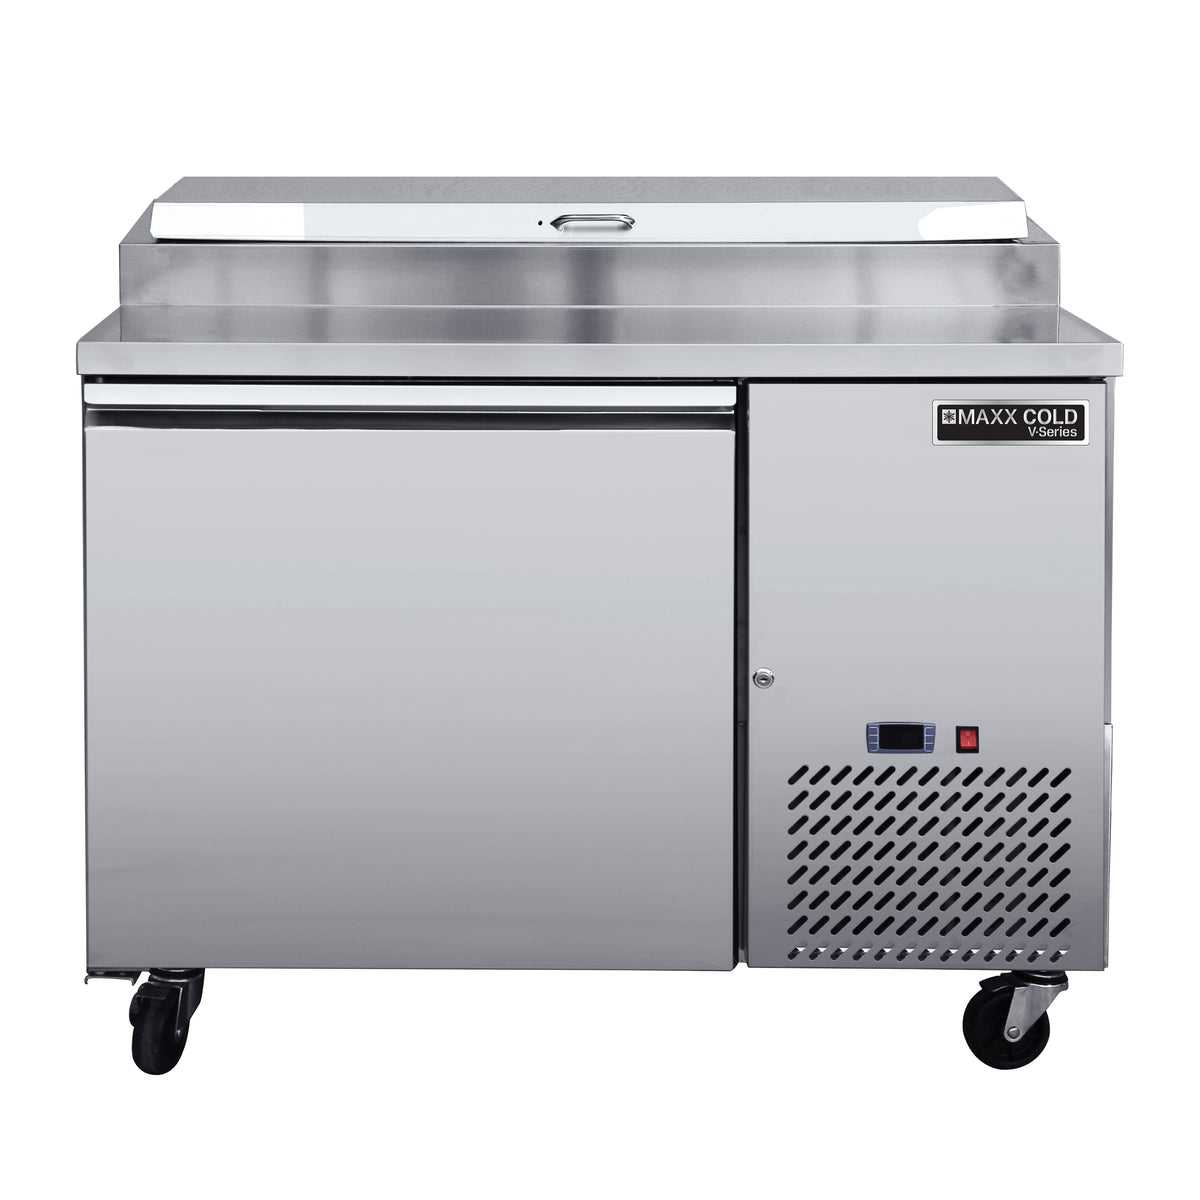 Maxx Cold MVPP50HC V-Series 1 Door Refrigerated Pizza Prep Table, 50"W, 11 cu ft, in Stainless Steel